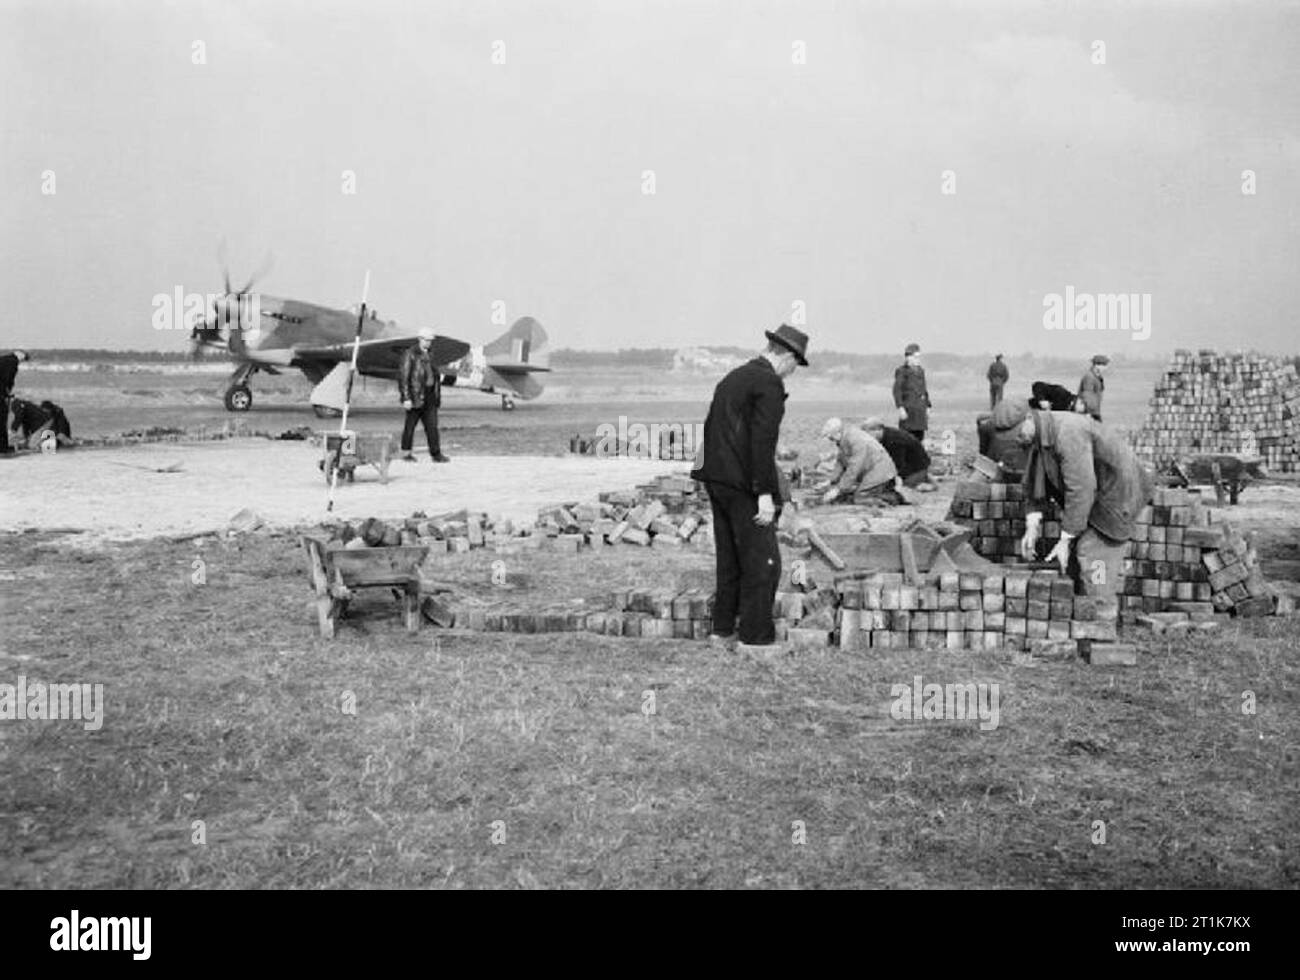 Royal Air Force 1939-1945- Fighter Command Dutch labourers use bricks to create a dispersal point at Volkel (B-80), 24 October 1944. In the background a No 274 Squadron Tempest (EJ714/JJ-W) taxies out for another defensive air patrol over the battlefront. Volkel was home to No 122 Wing until April 1945, when the Tempest squadrons relocated to bases on German soil. Stock Photo